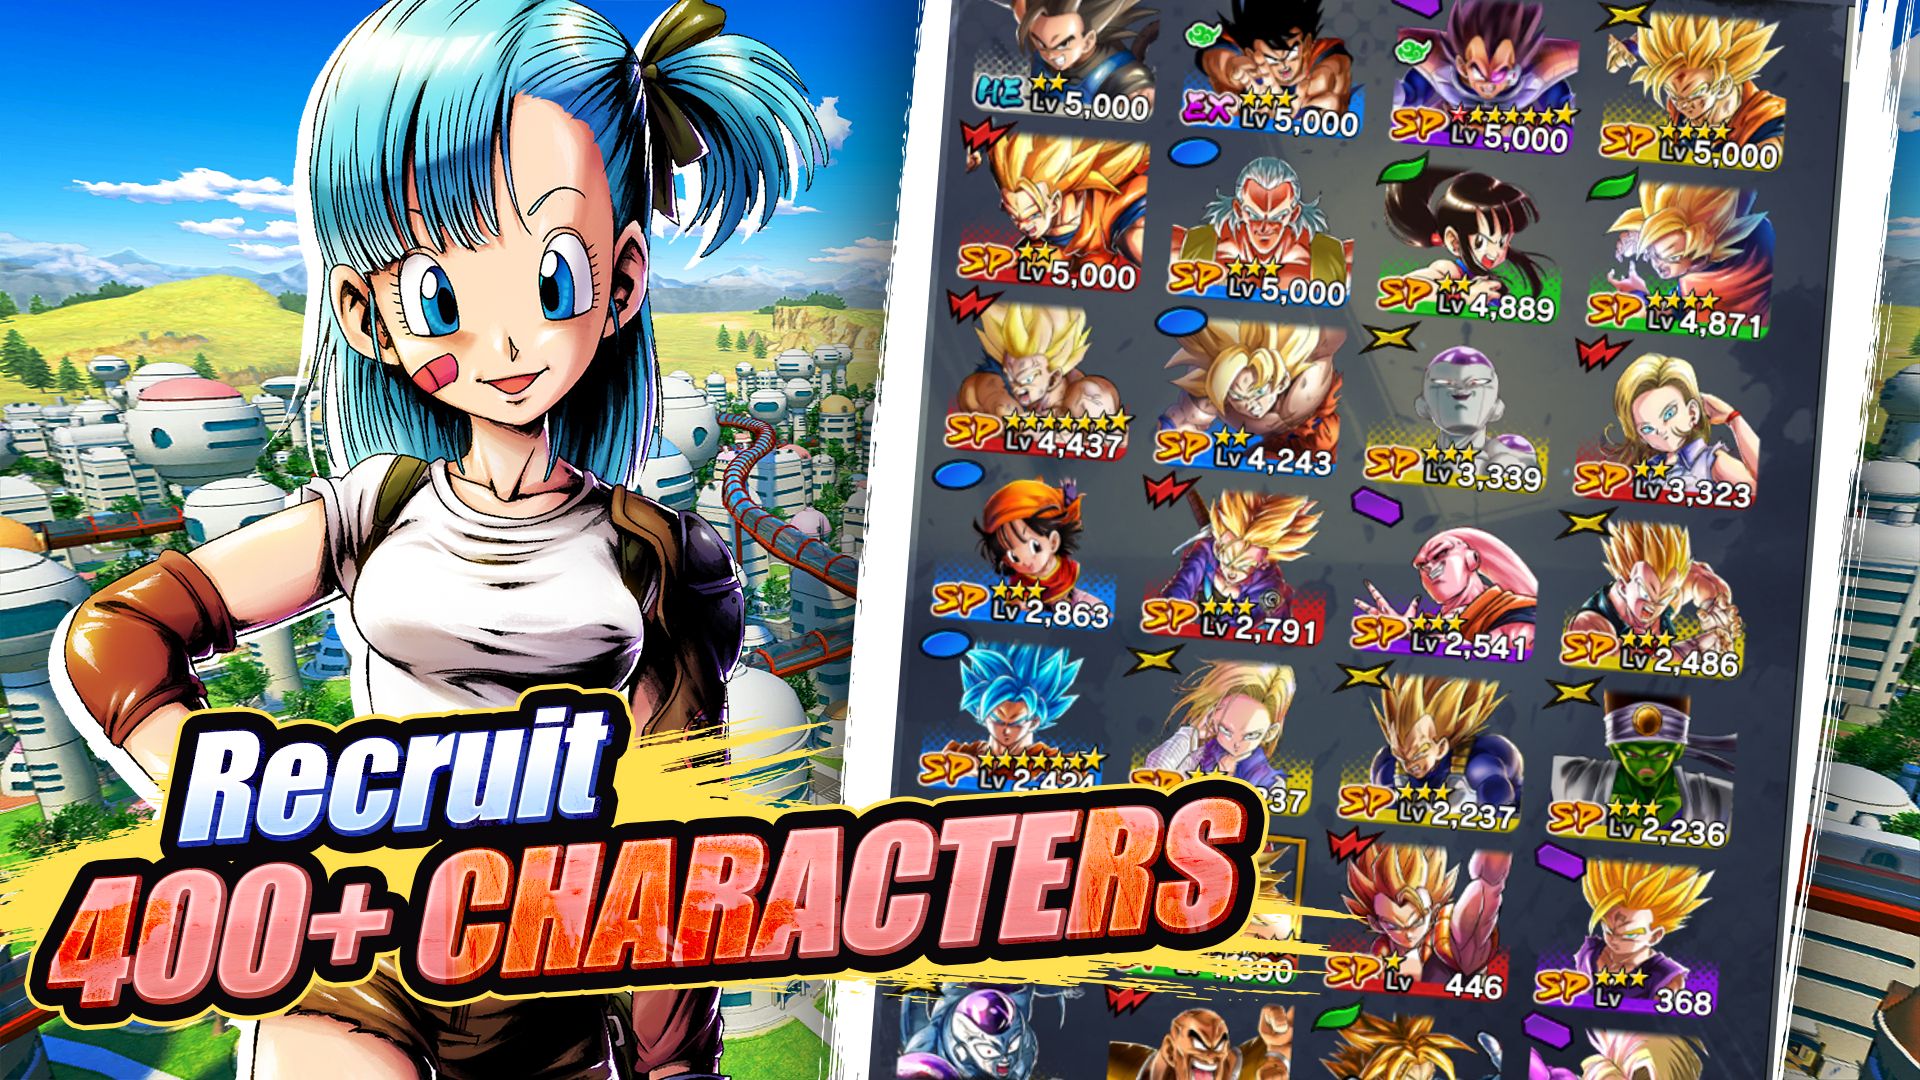 best-fighting-games-for-android-dragonball-legends-recruit-400-plus-characters